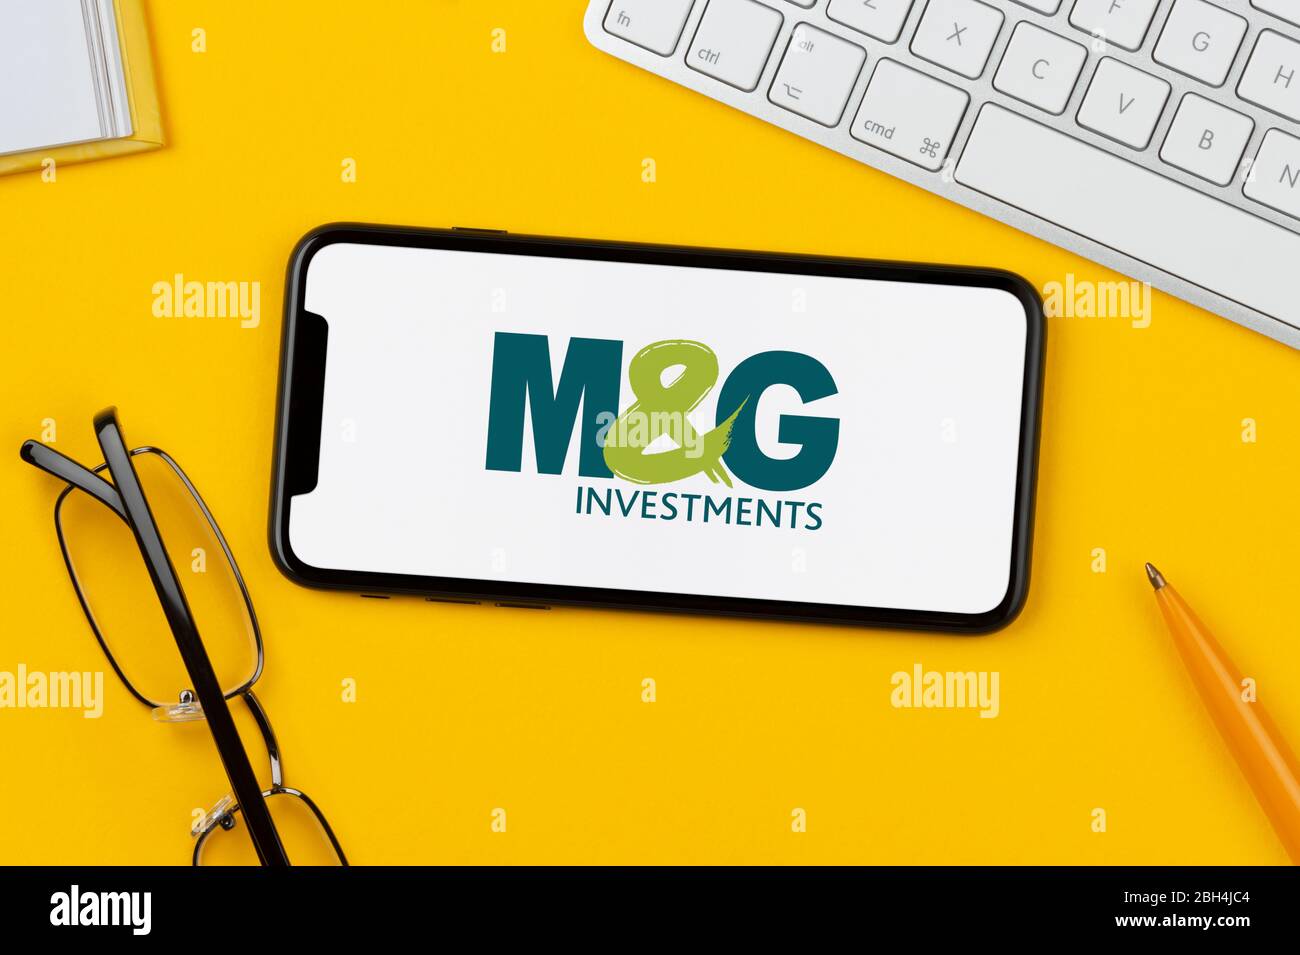 A smartphone showing the M&G Investments logo rests on a yellow background along with a keyboard, glasses, pen and book (Editorial use only). Stock Photo